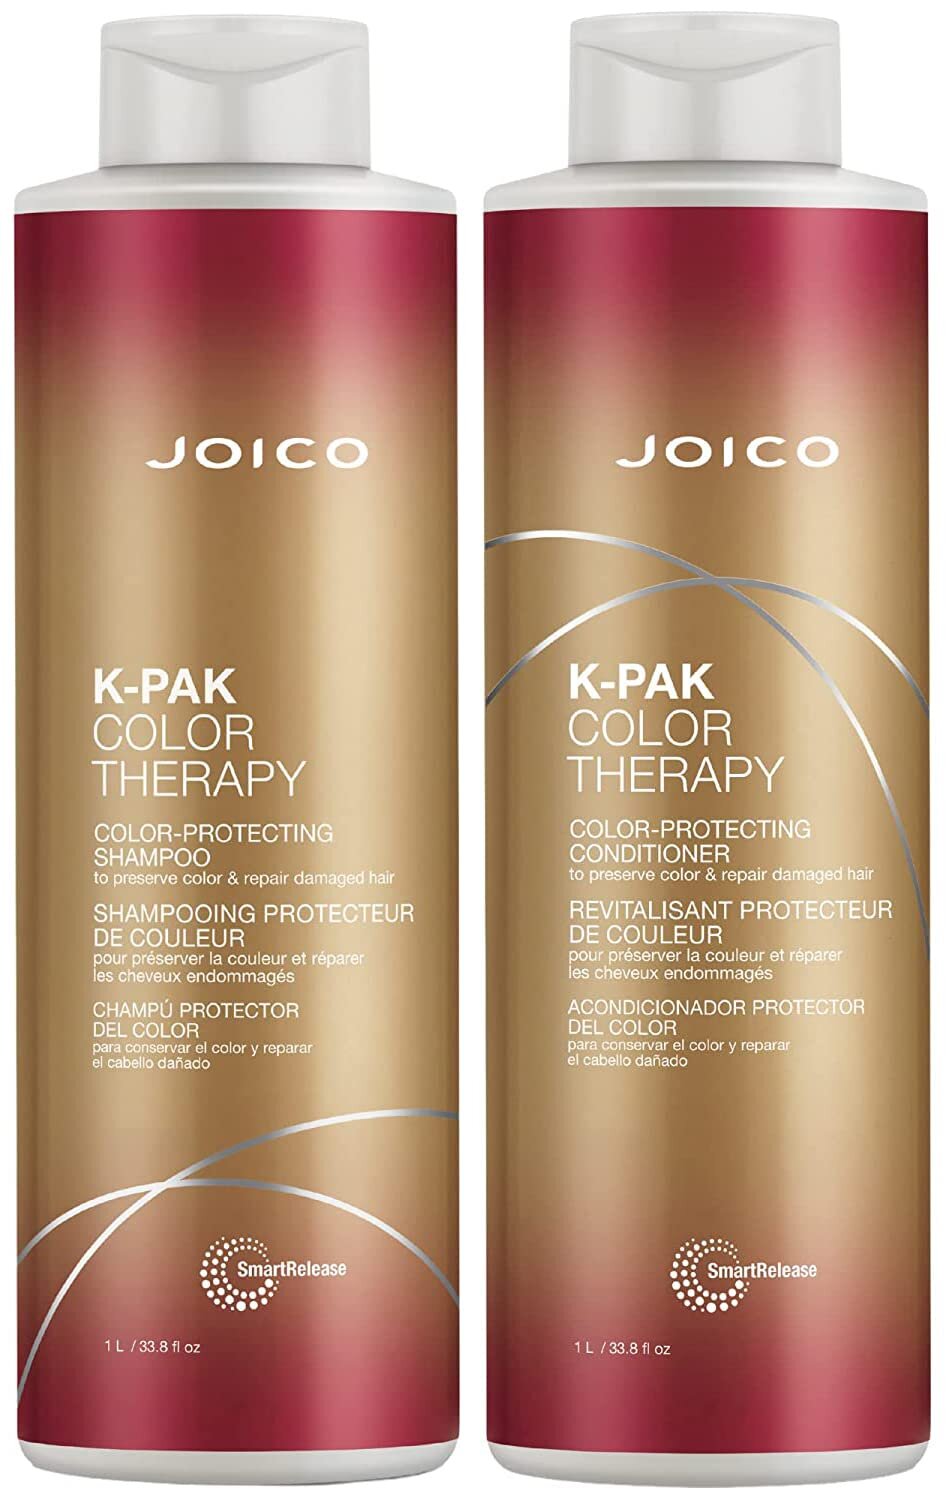 K-Pak Color Therapy kit by Joico for Unisex - 2 Pc Kit 33.8 oz Shampoo, 33.8 oz Conditioner - image 2 of 6